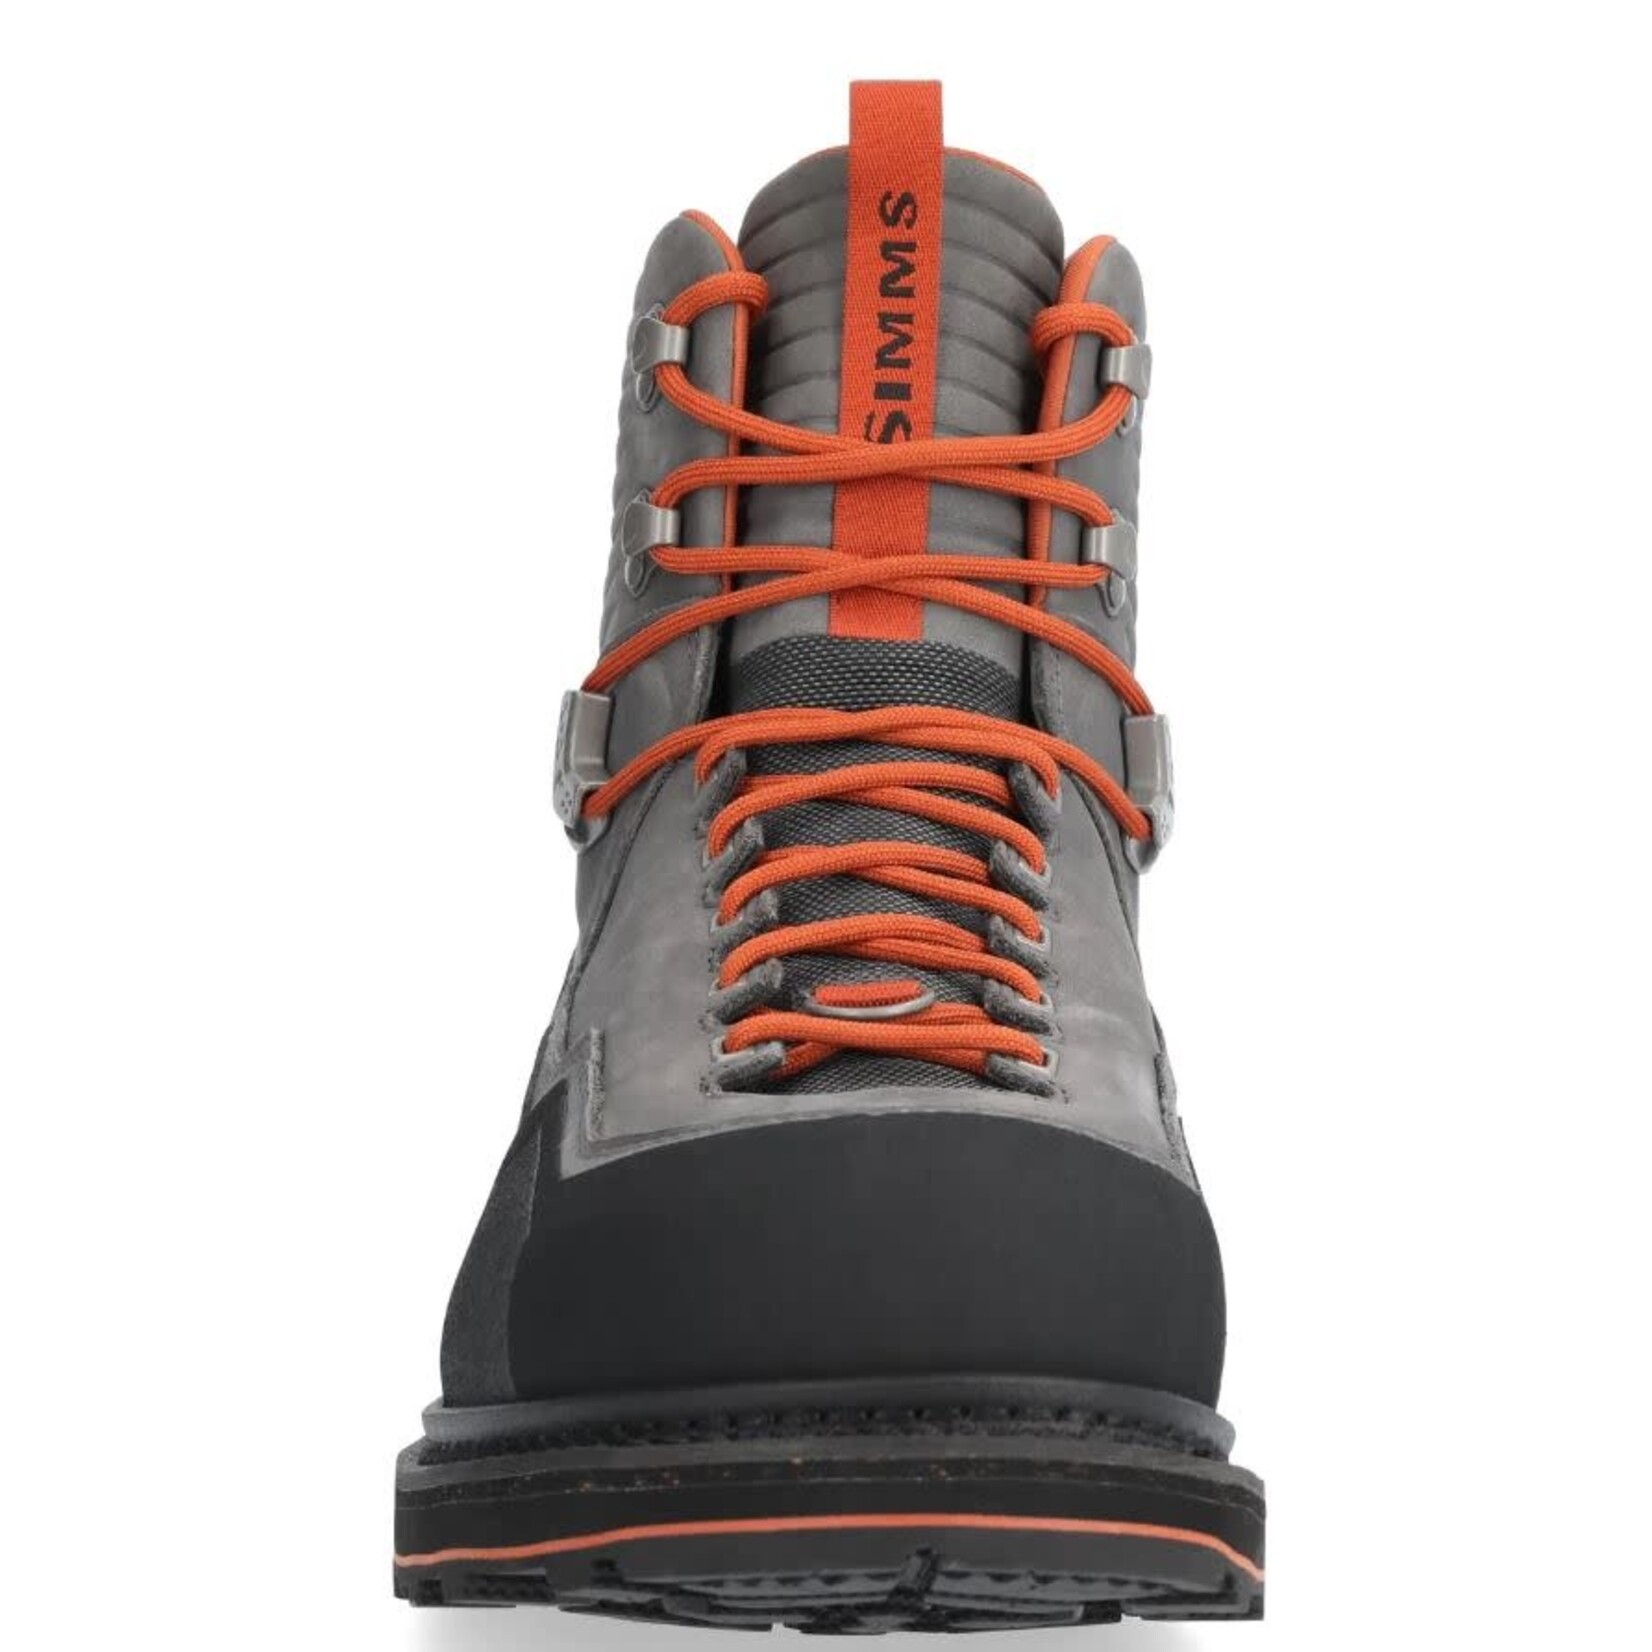 simms Simms G3 Guide Wading Boots-Vibram